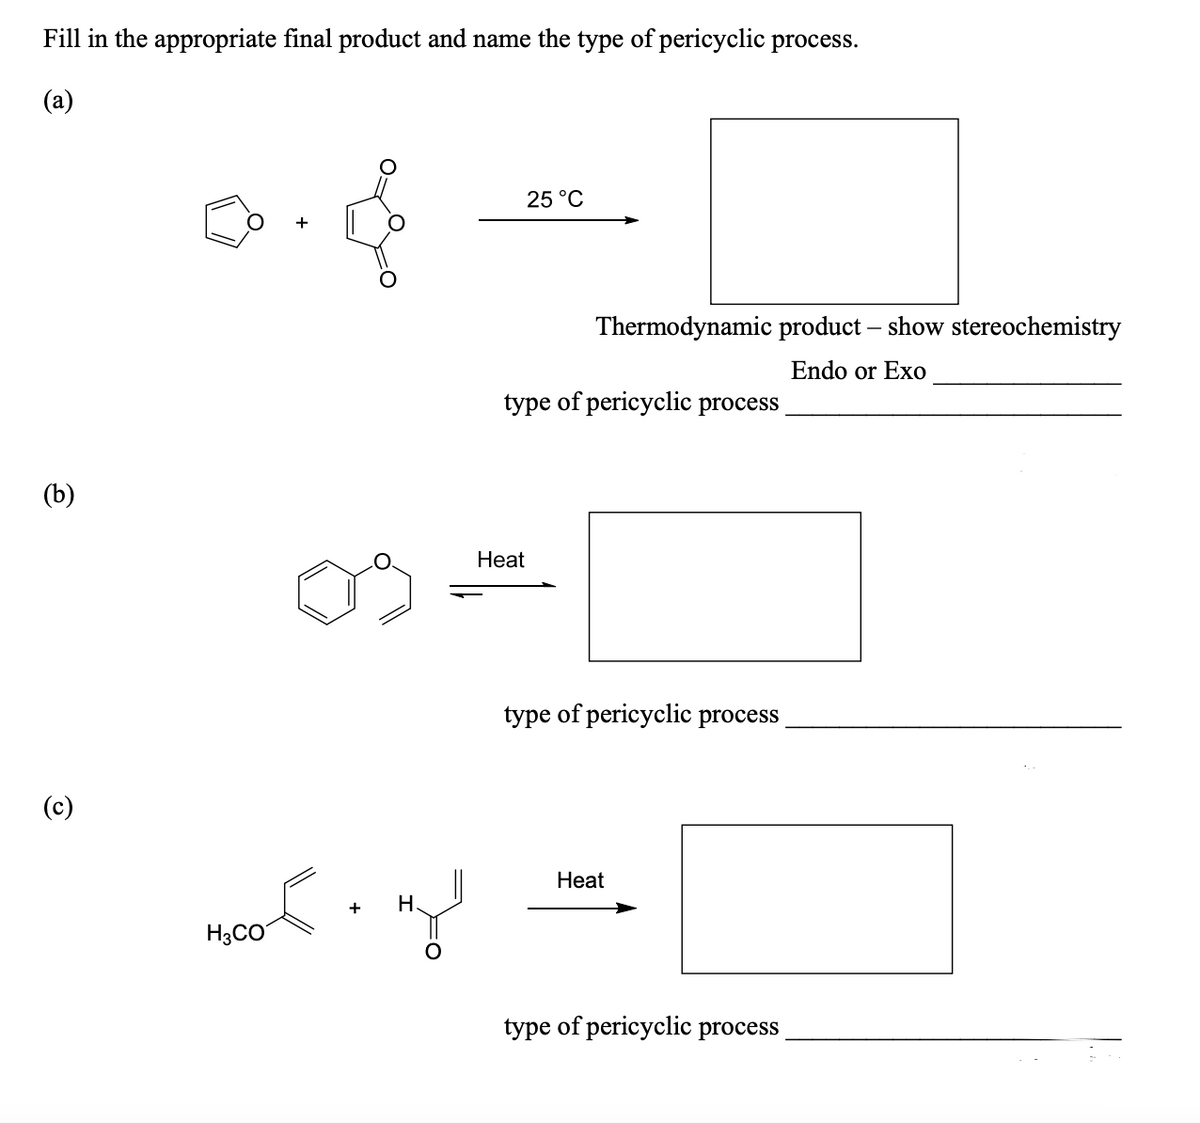 Fill in the appropriate final product and name the type of pericyclic process.
(a)
25 °C
Thermodynamic product – show stereochemistry
Endo or Exo
type of pericyclic process
(b)
Нeat
type of pericyclic process
(c)
Нeat
+
Н.
H3CO
type of pericyclic process
